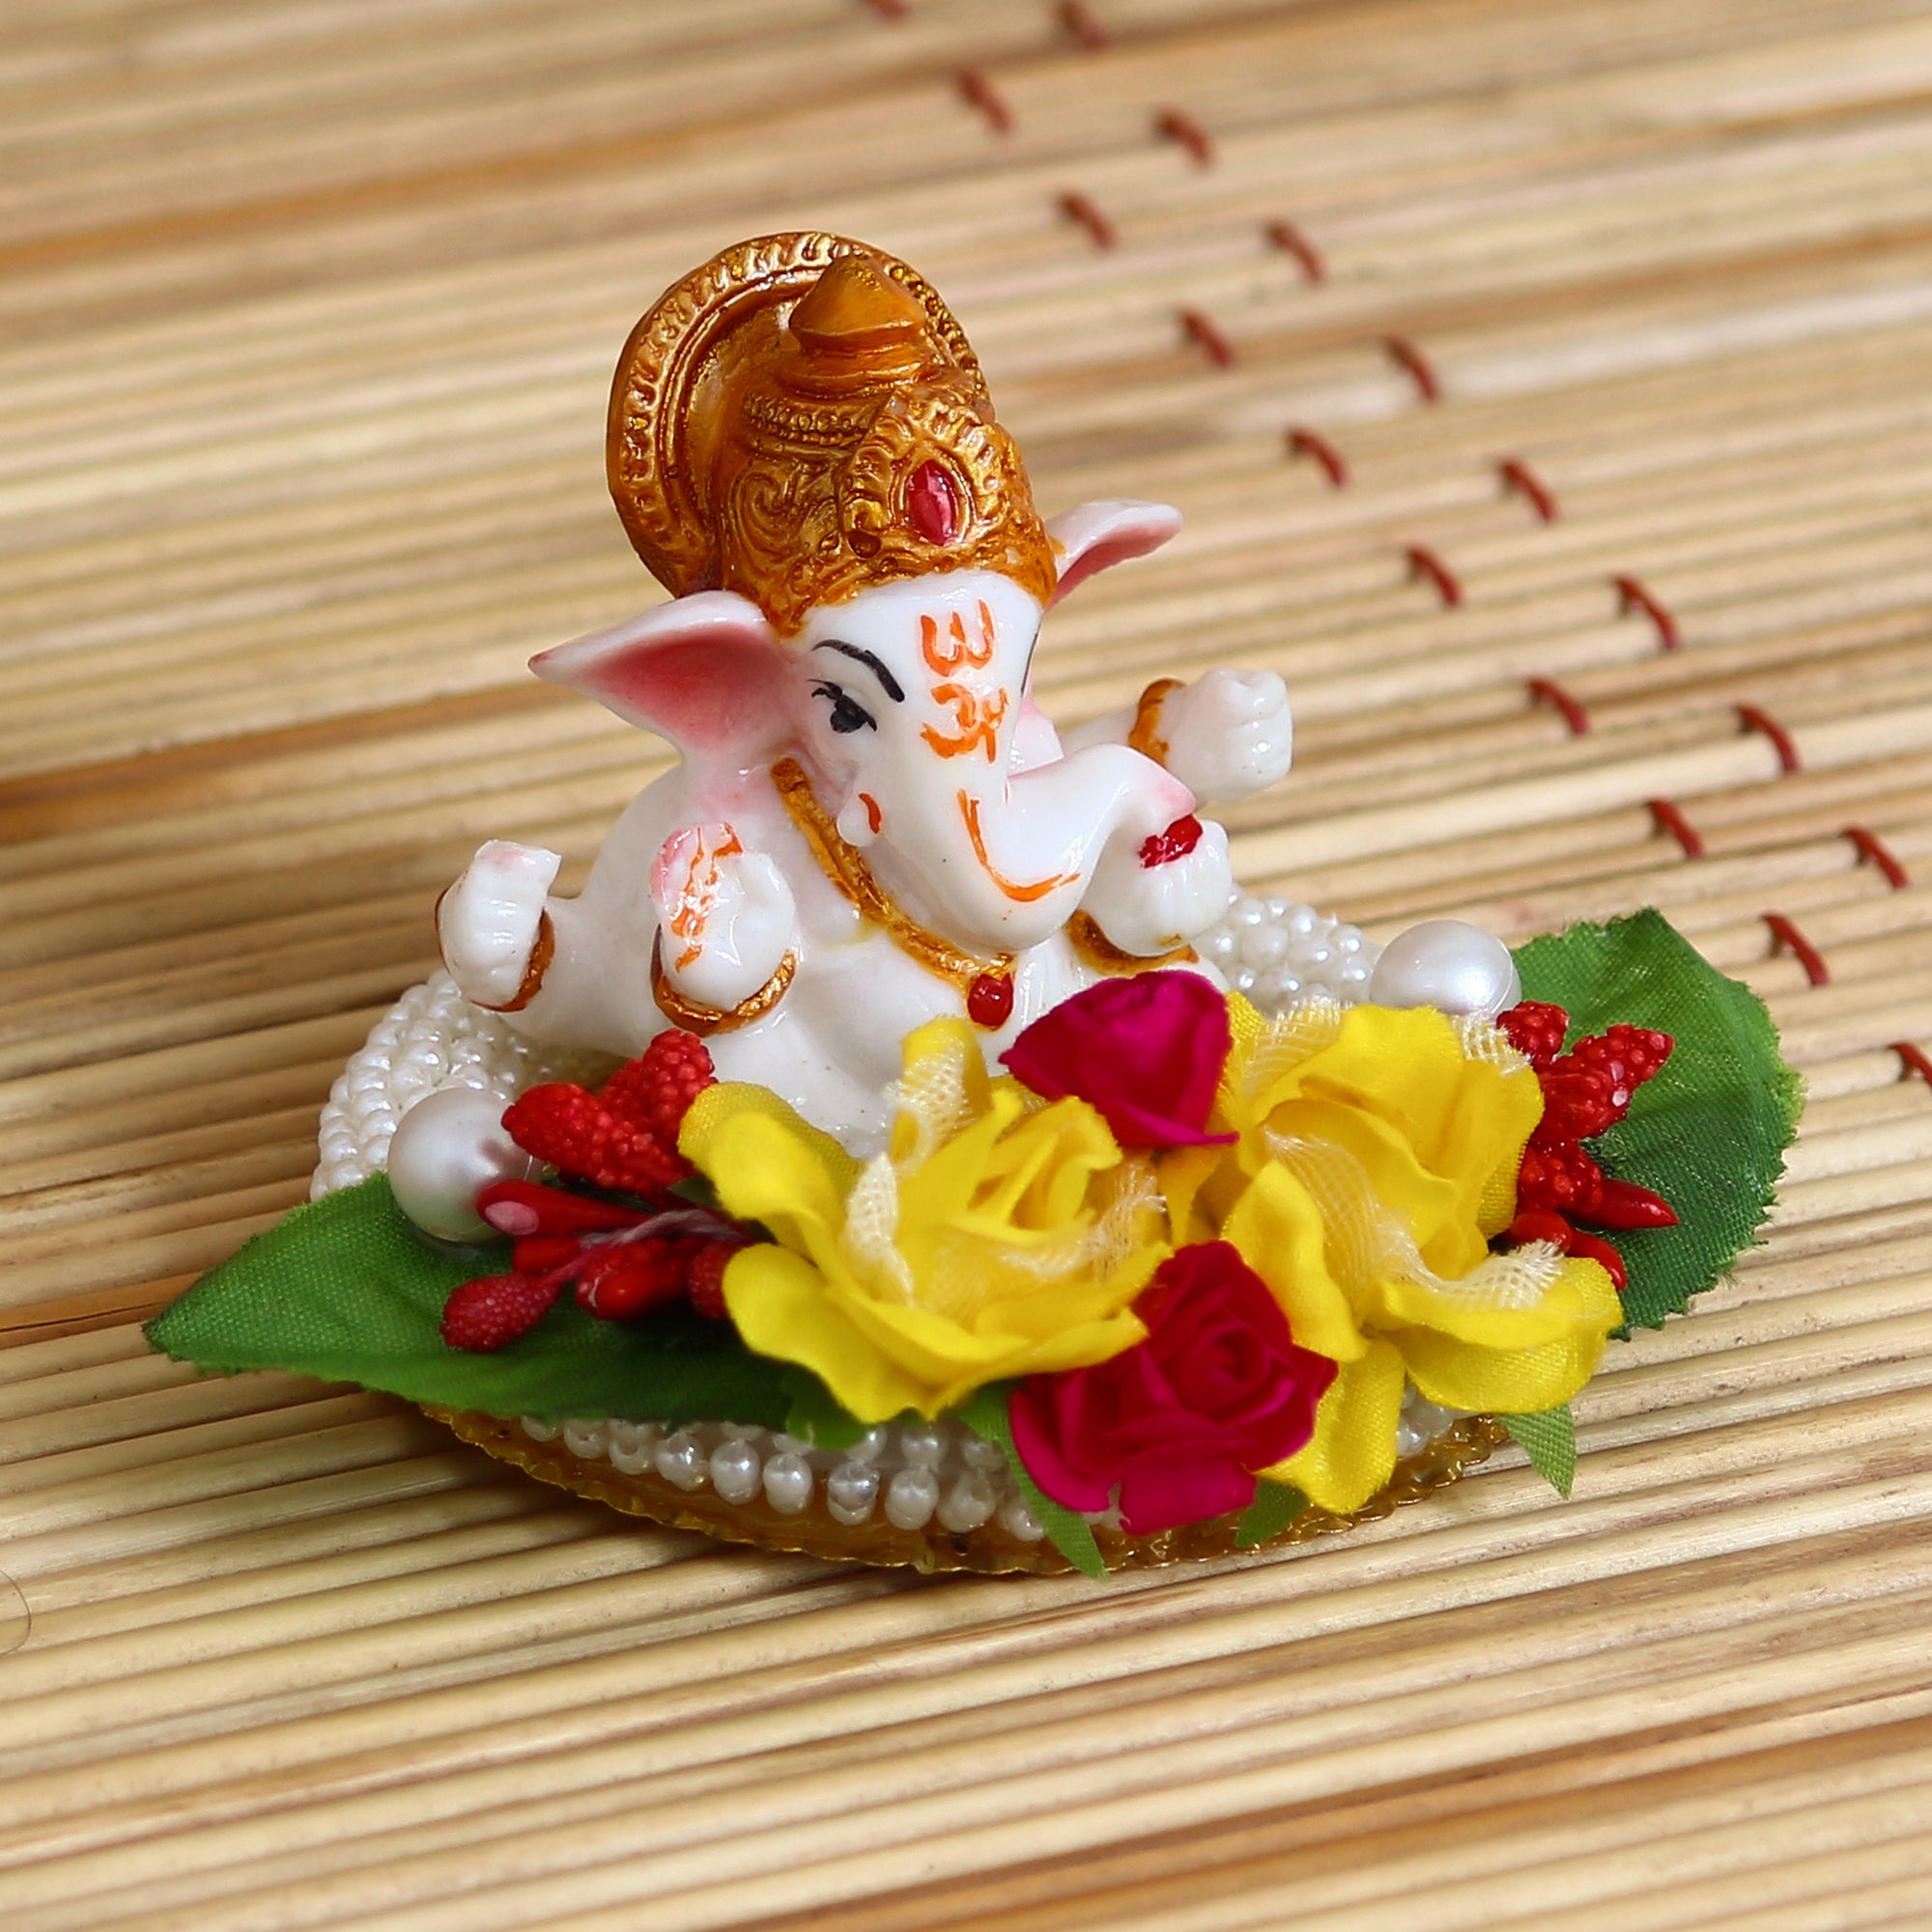 Lord Ganesha Idol on Decorative Handcrafted Plate with Colorful Flowers and Leaf 1